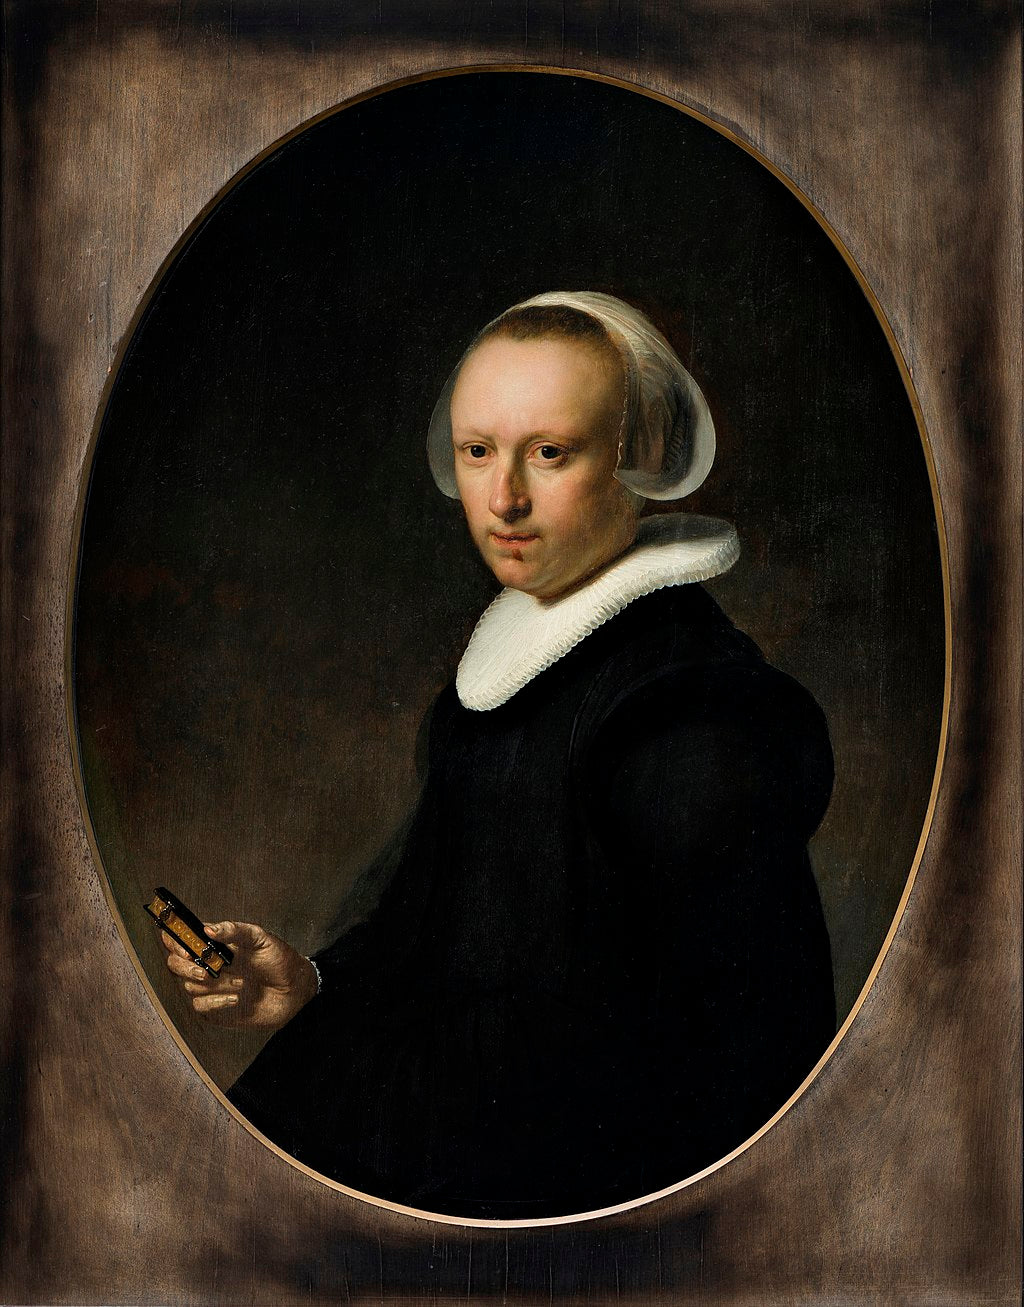 Portrait of a 39-year-old Woman Painting by Rembrandt Oil on Canvas Reproduction by Blue Surf Art